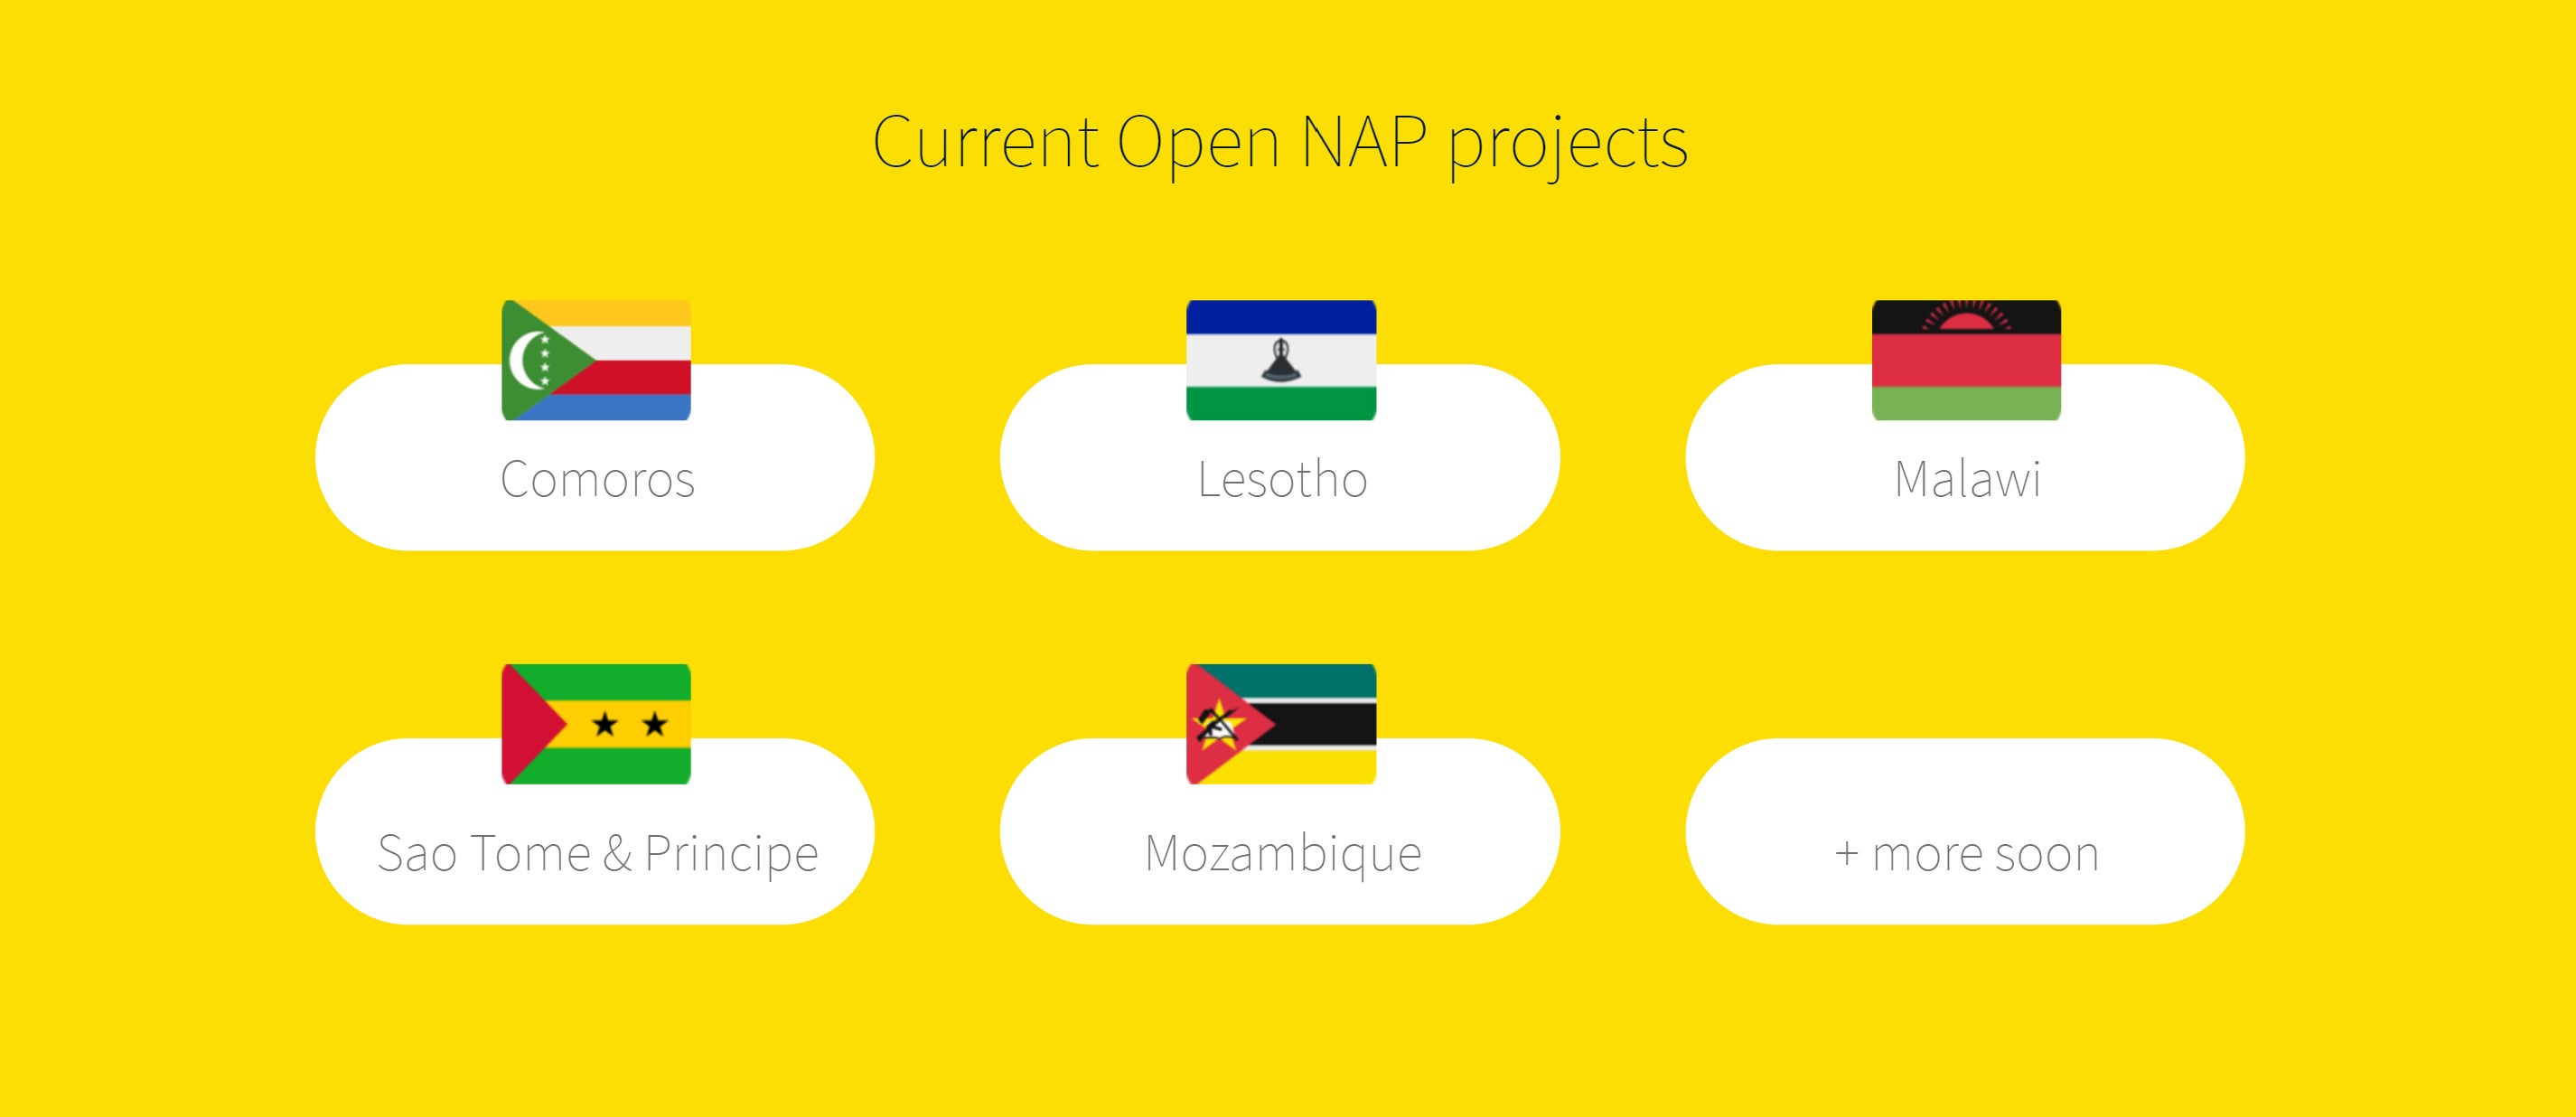 Current Open NAP projects